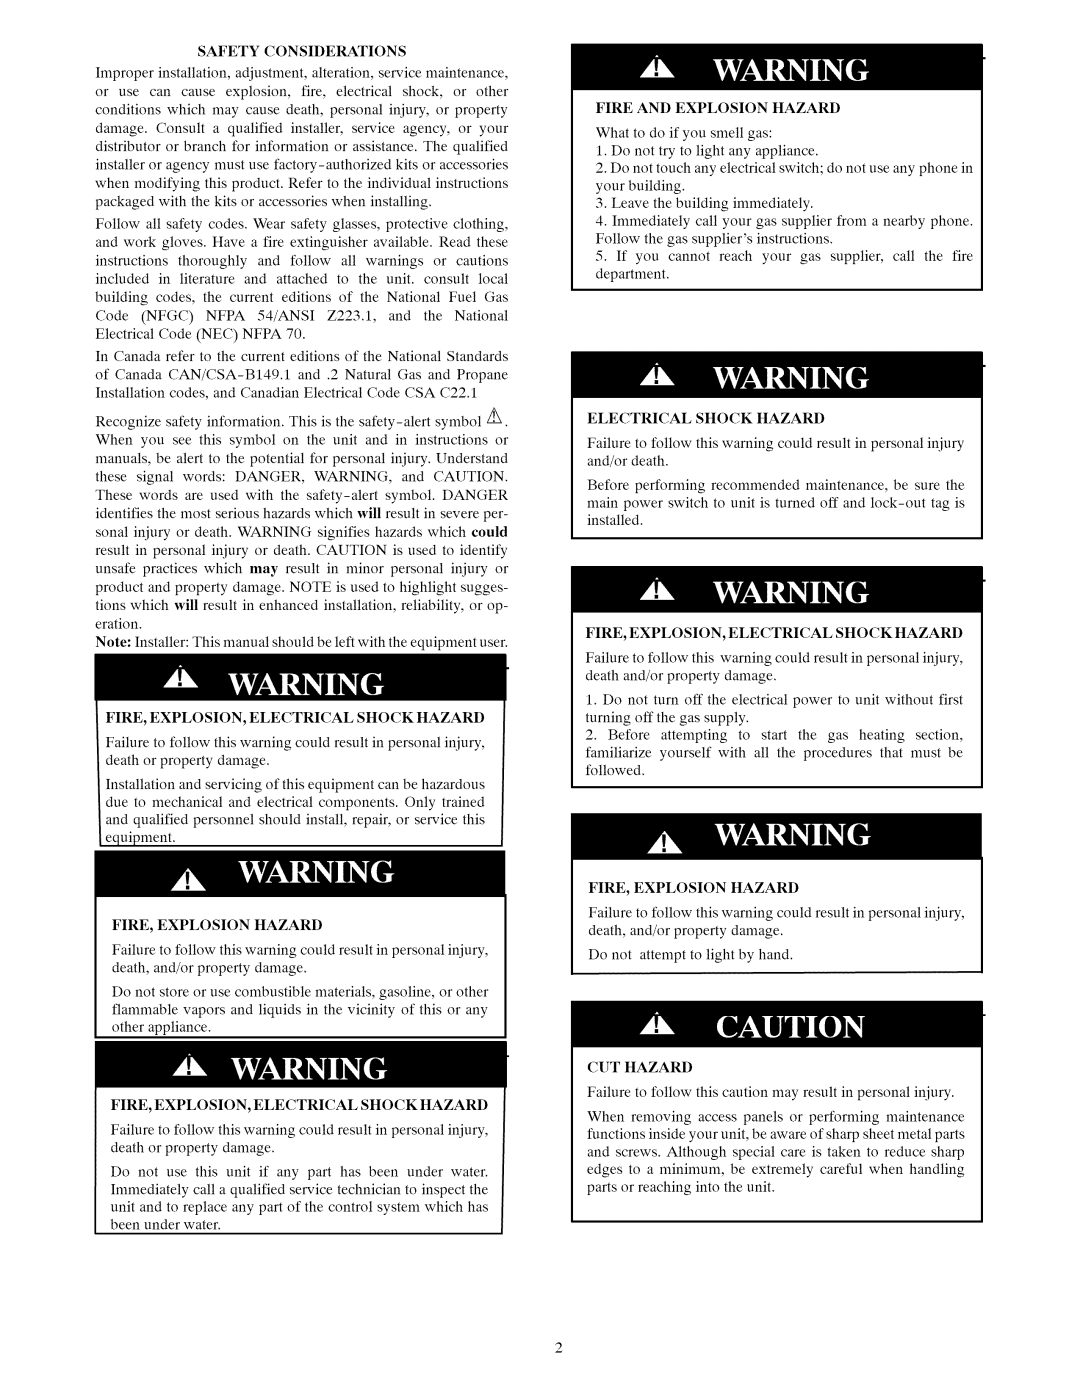 Carrier 48ES manual Safety Considerations, these signal words DANGER, WARNING, and CAUTION, Fire, Explosion Hazard 